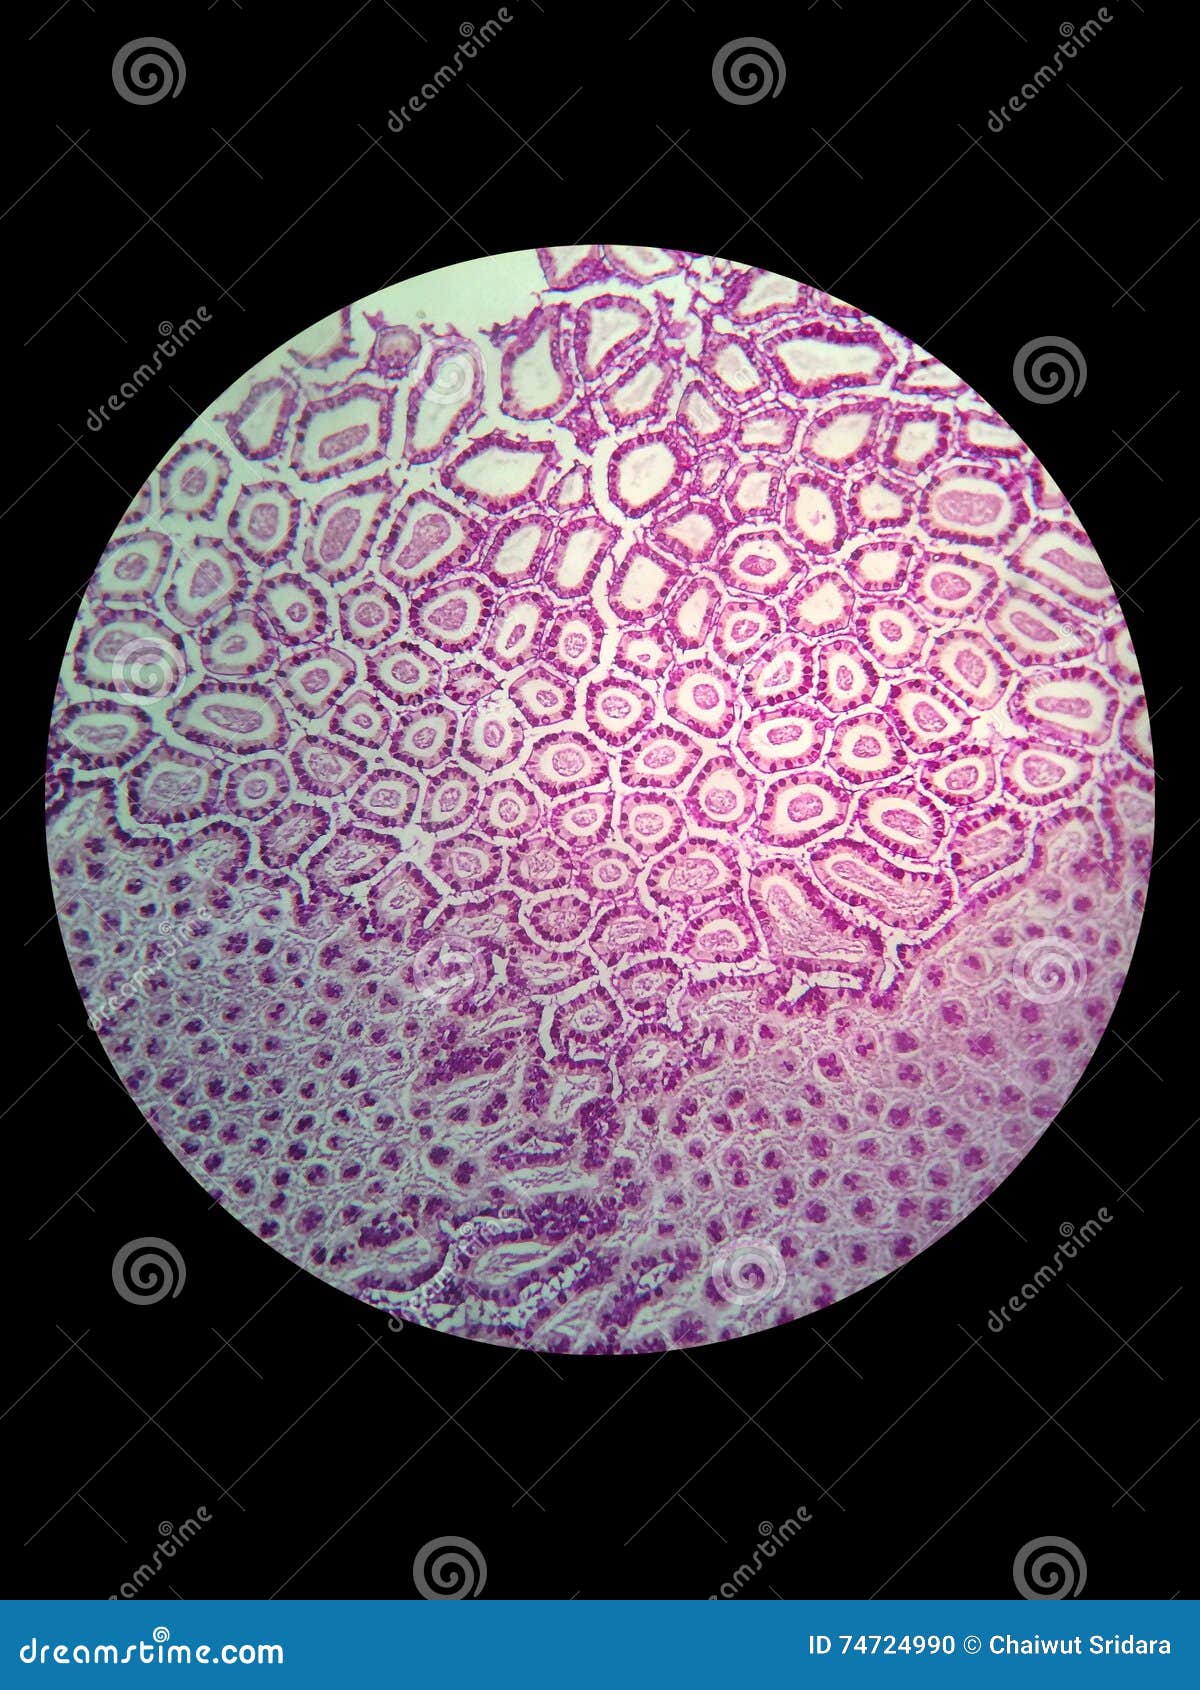 simple epithelial cell of kidney